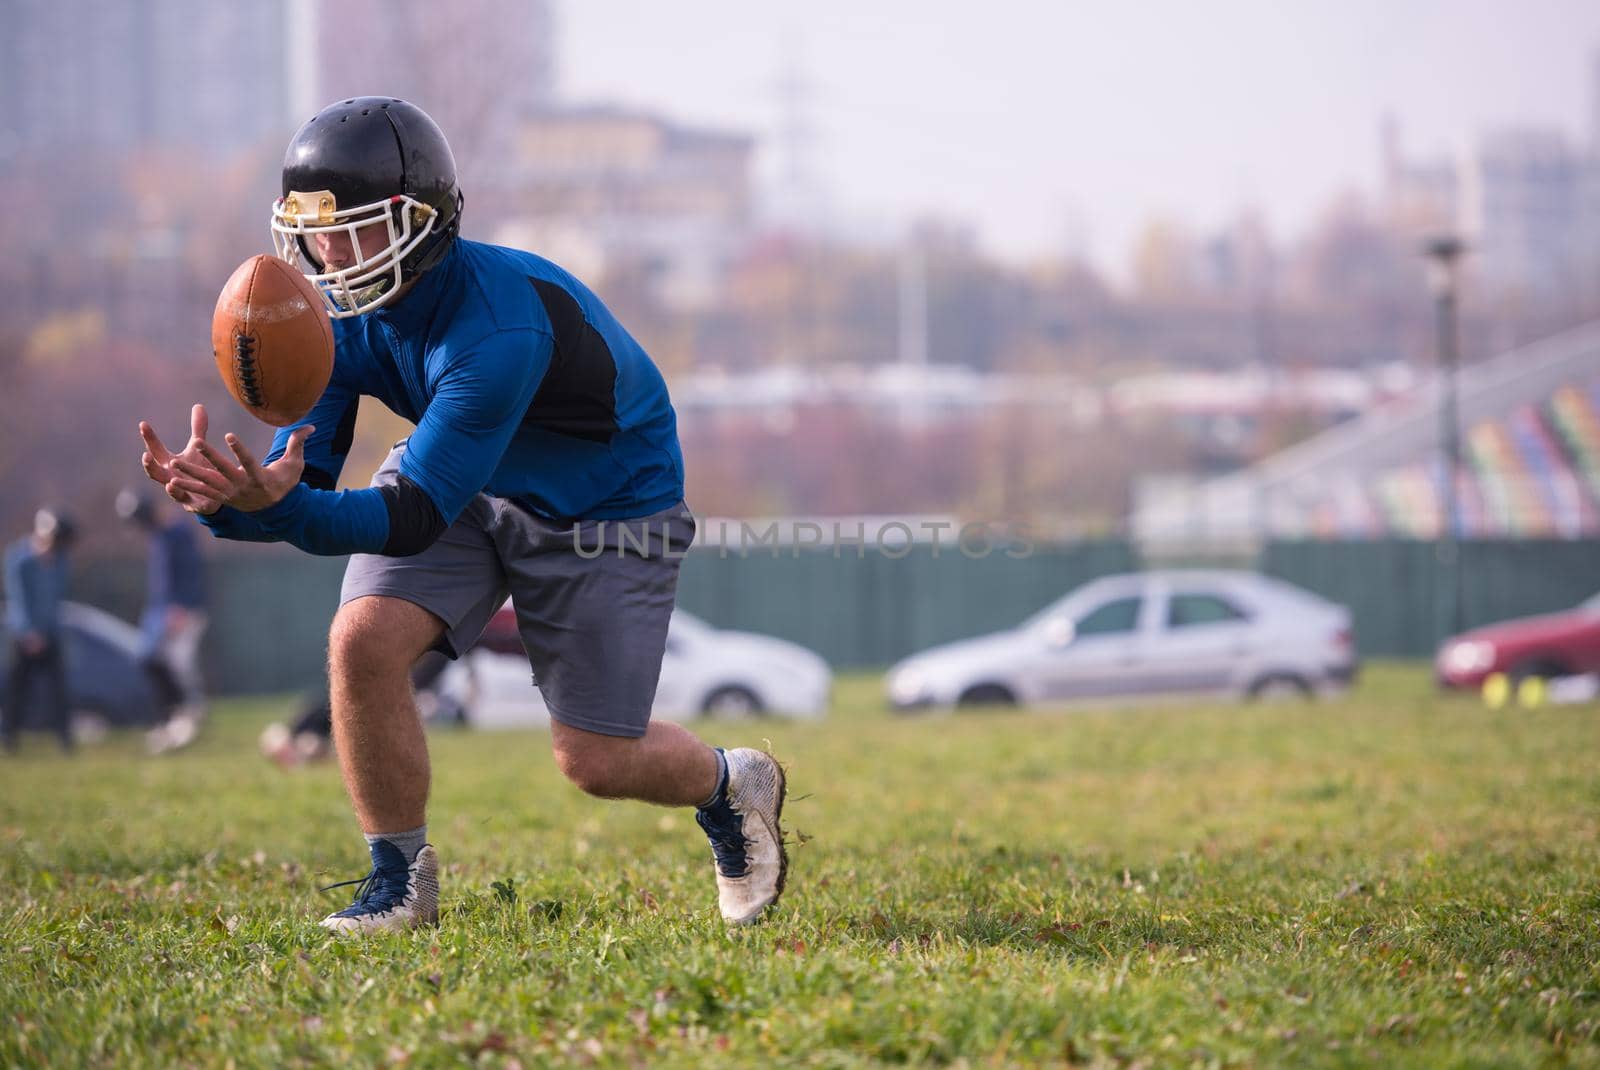 group of young american football players in action during the training at field